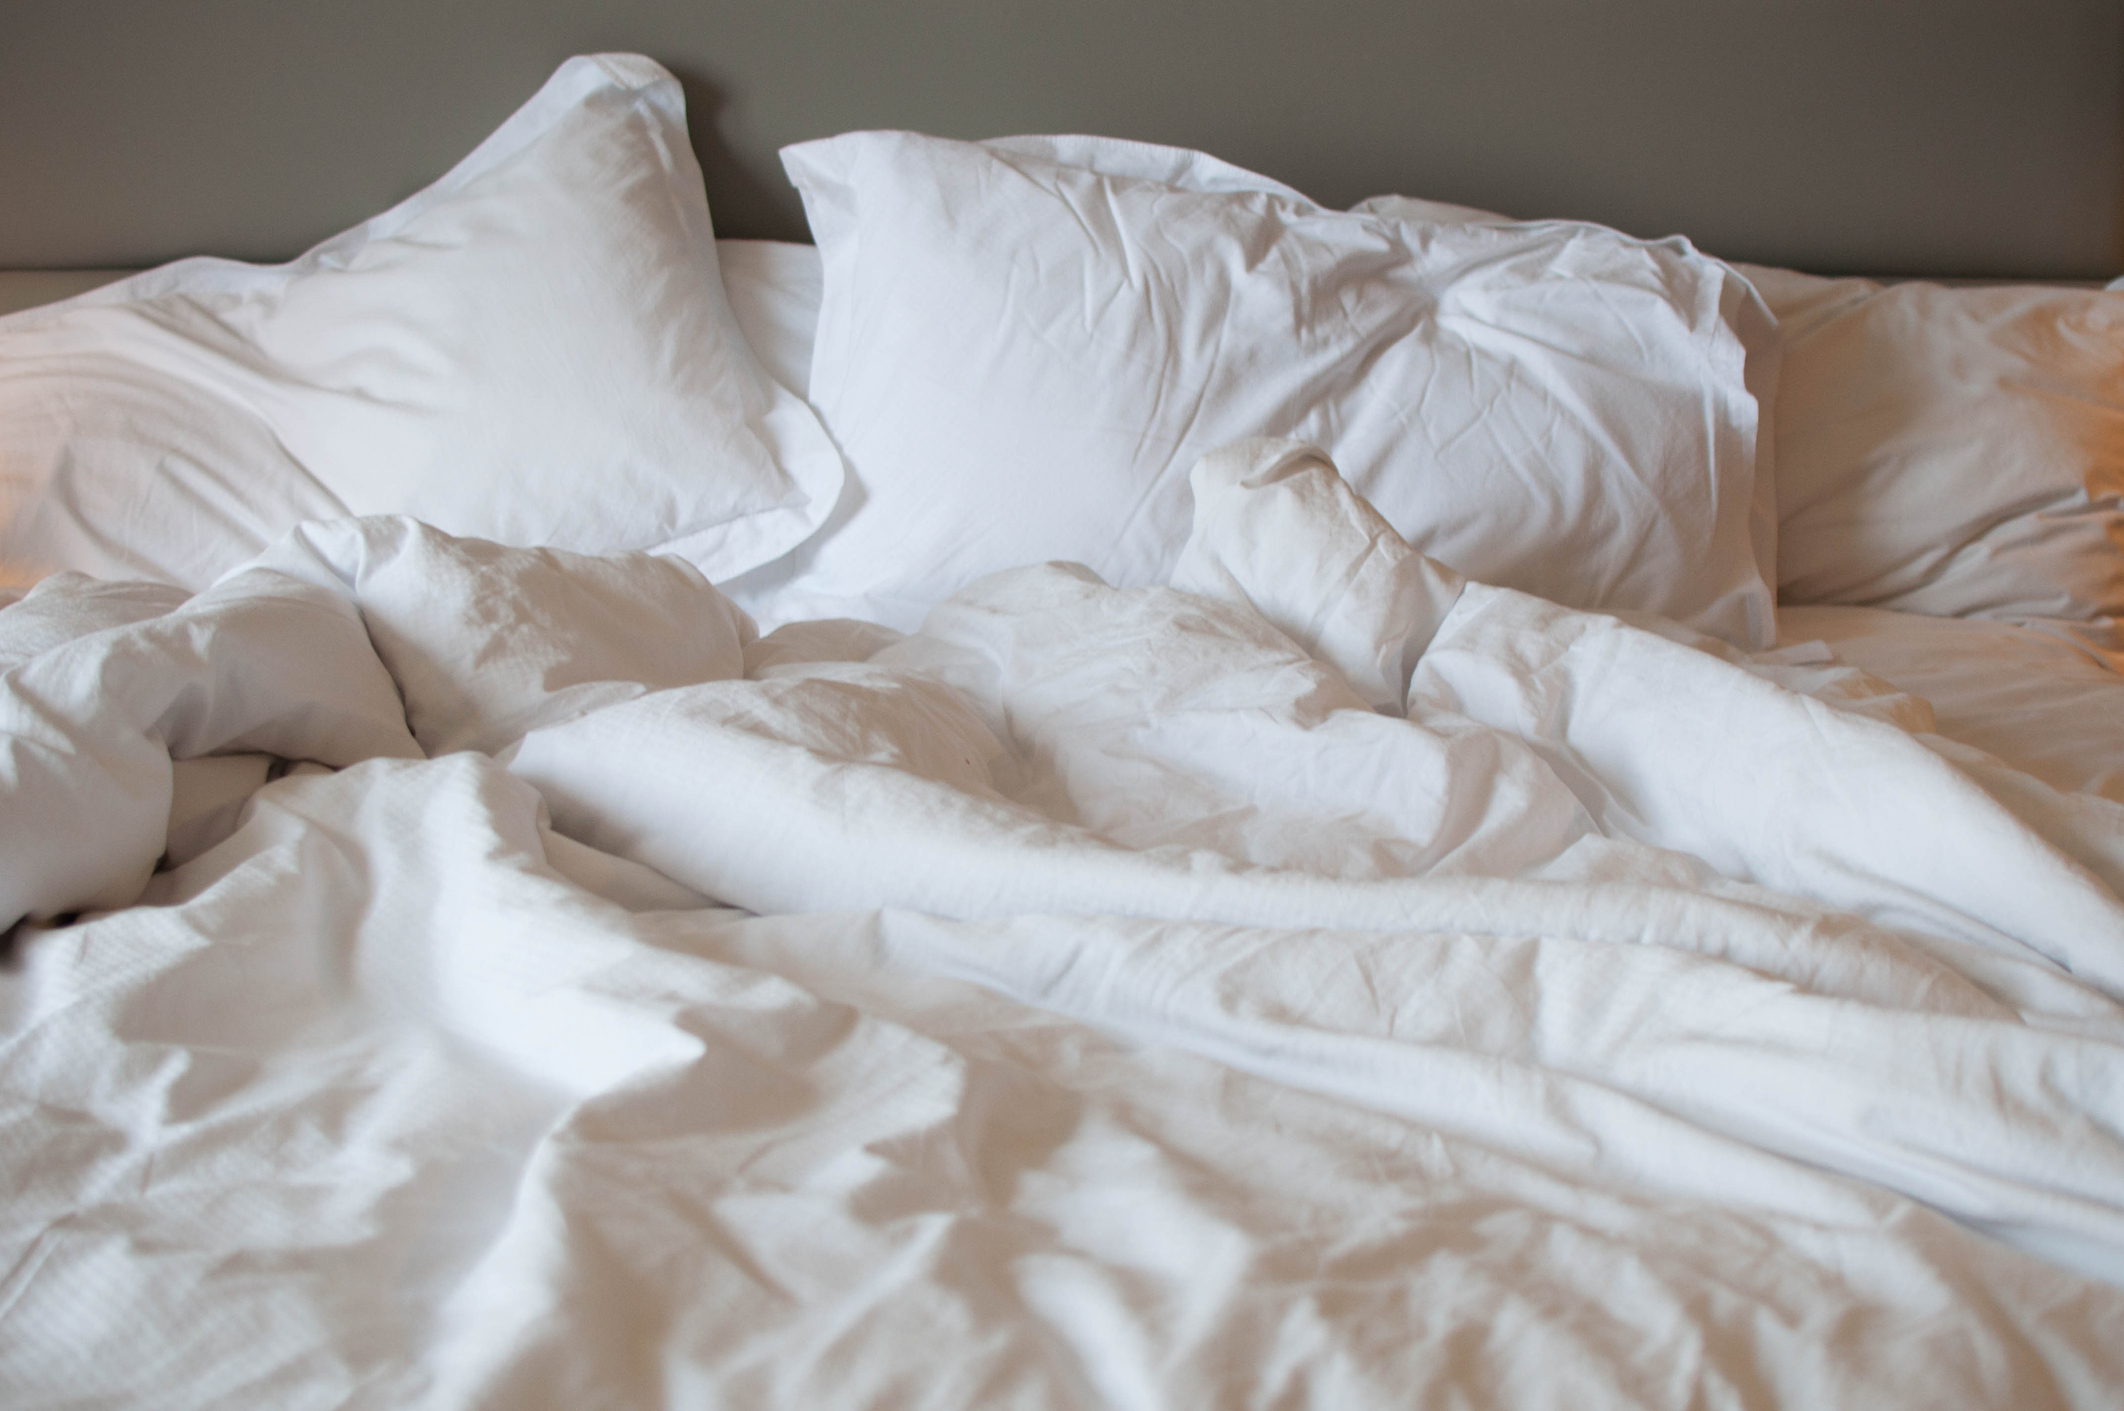 Unmade bed with rumpled white sheets and pillows, suggesting recent use